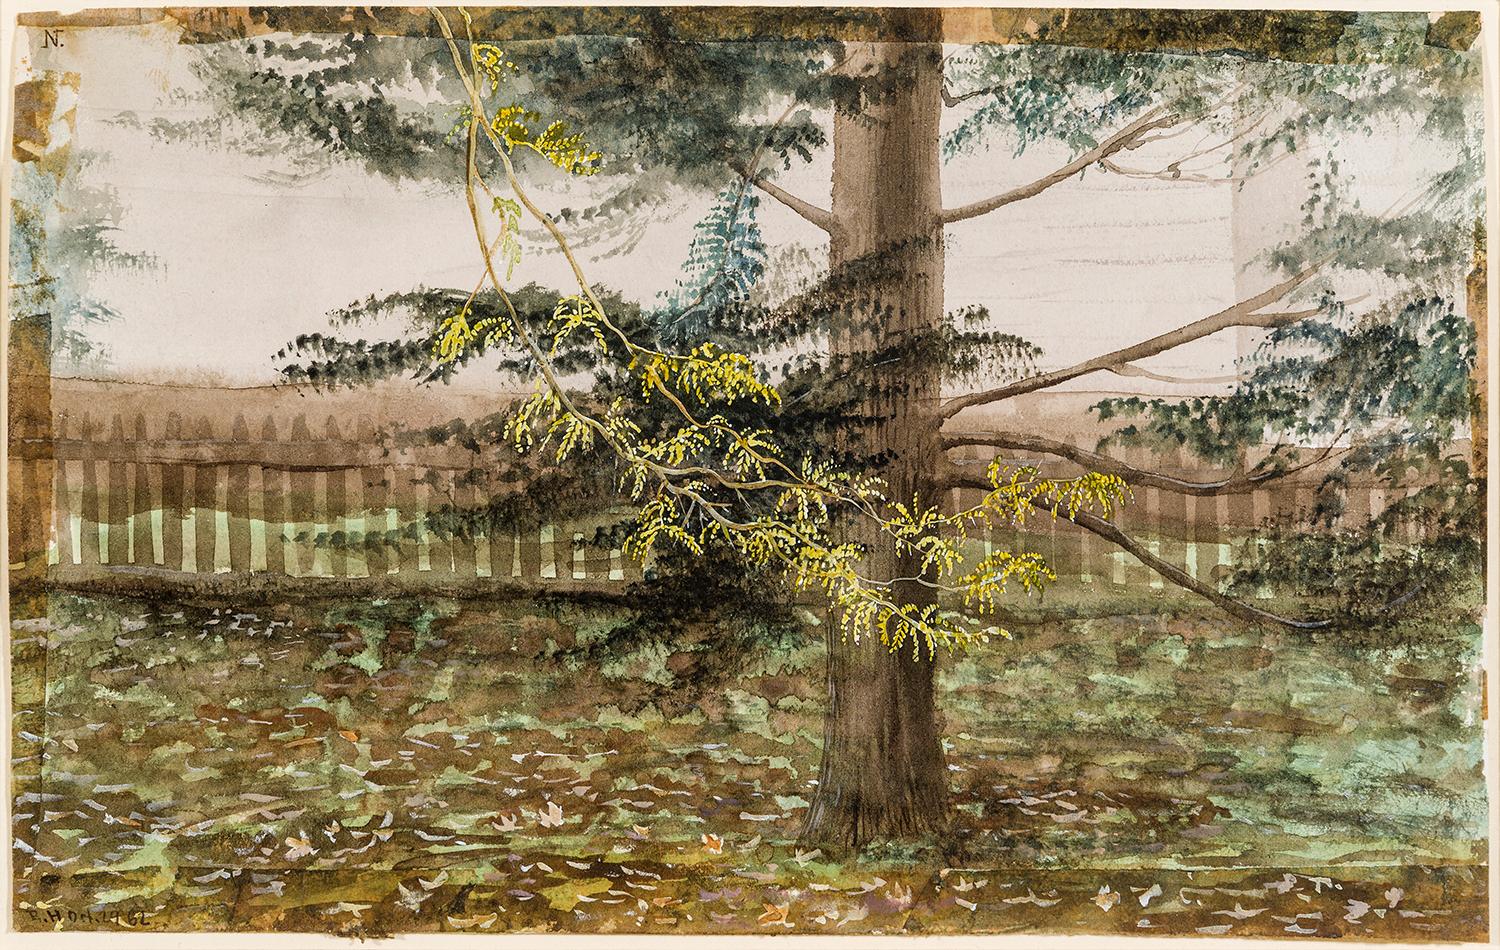 Tree and Fence, East Hartford, Connecticut (New England Landscape) 